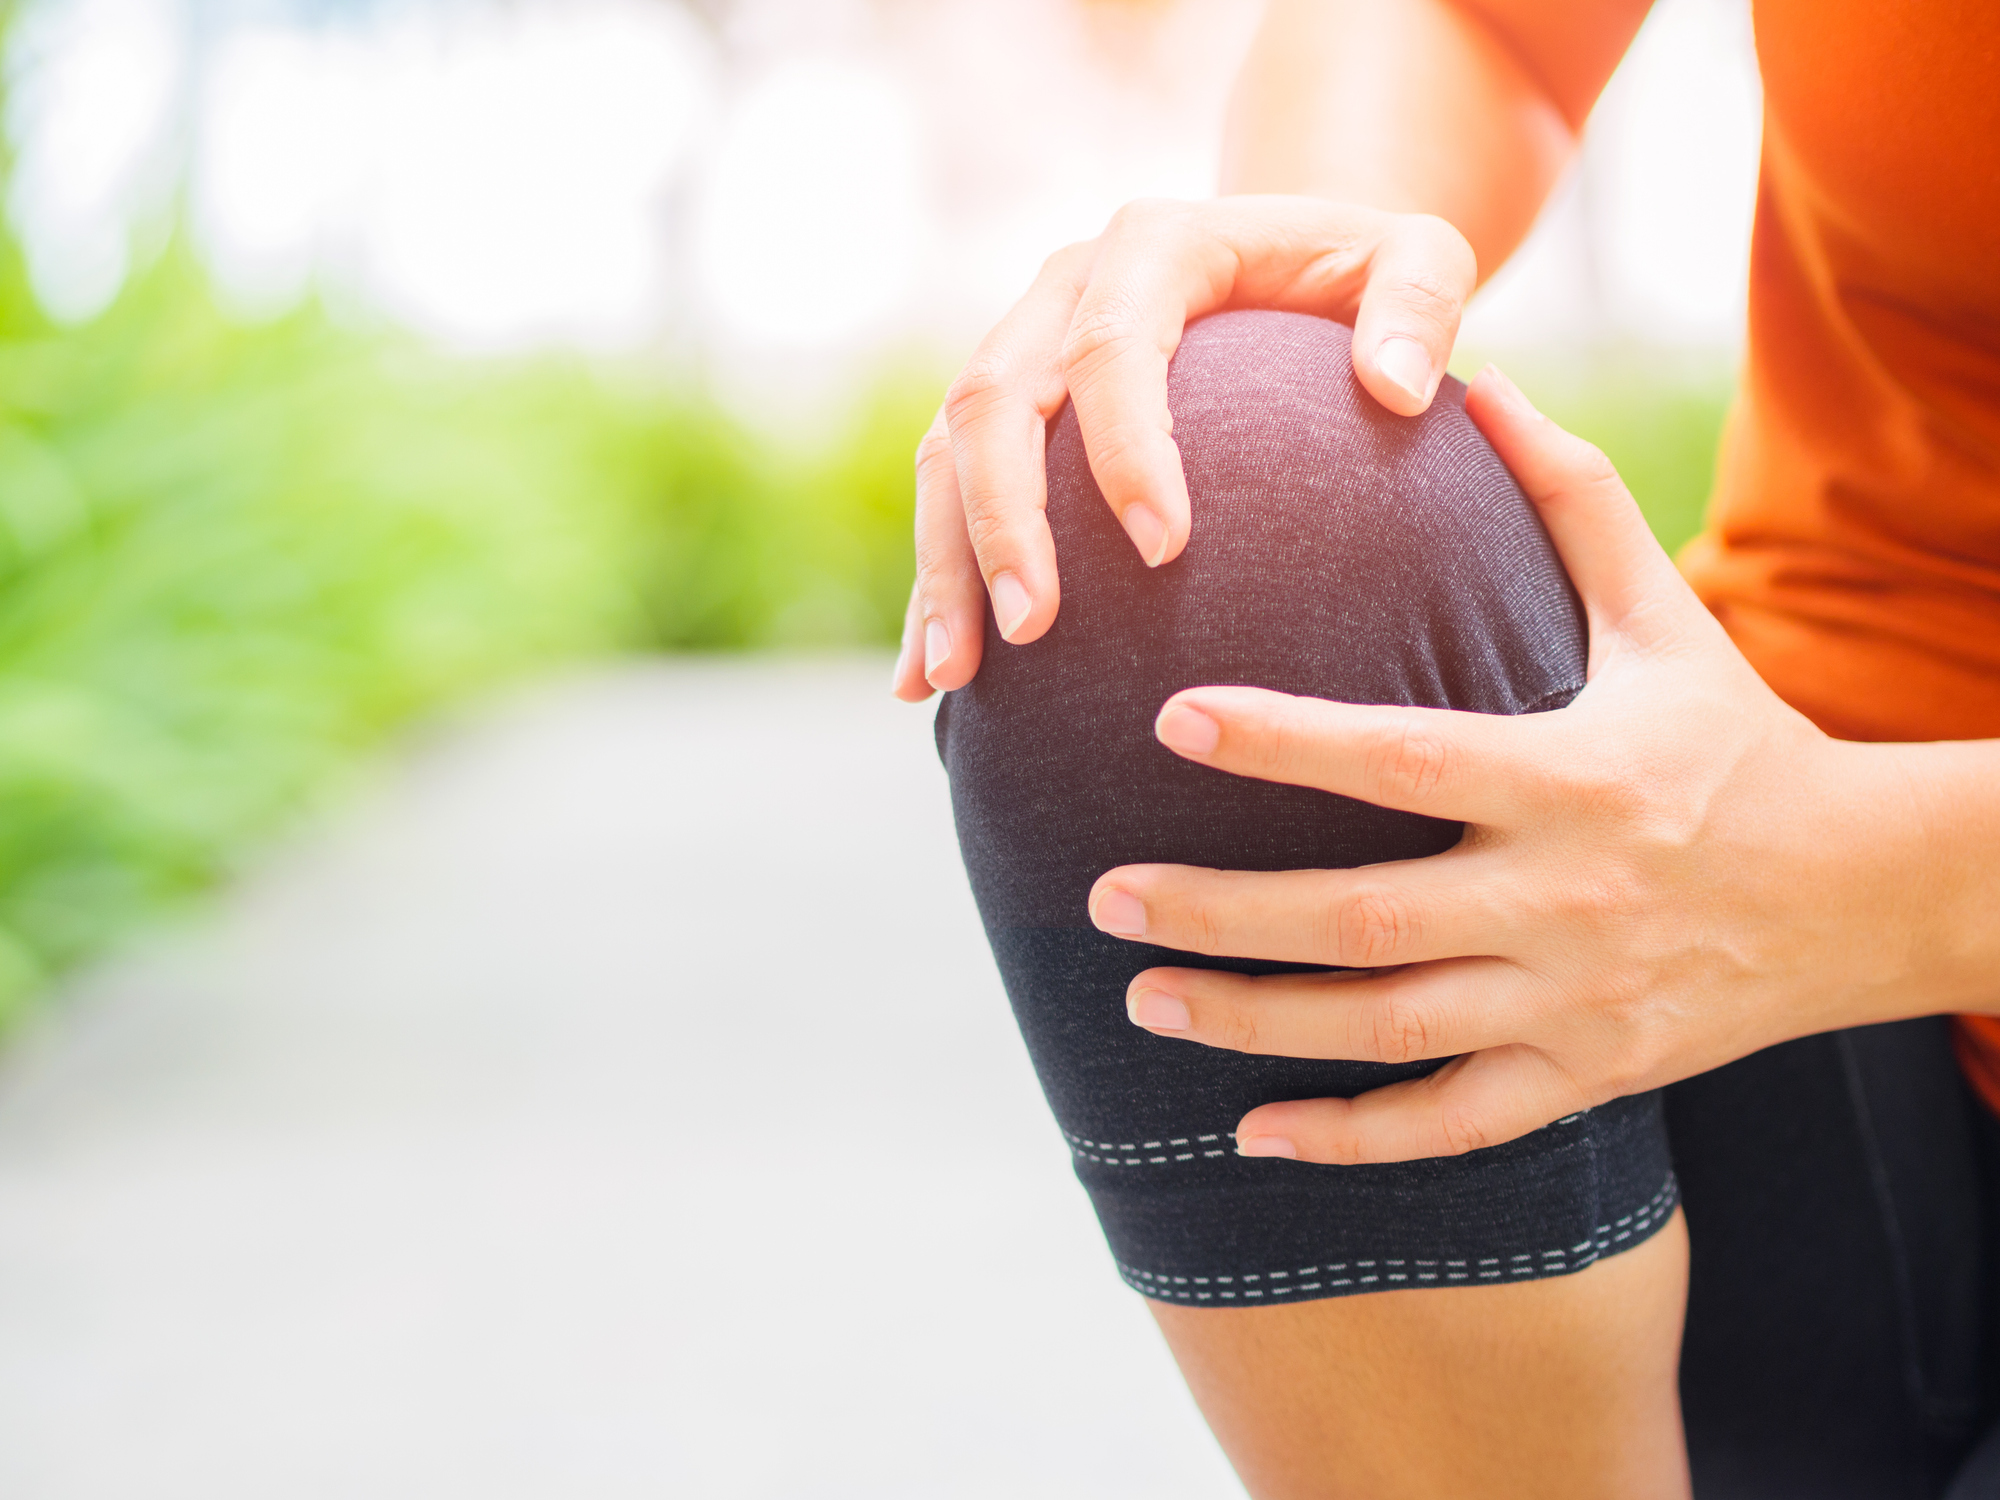 4 exercises for stronger, pain-free knees